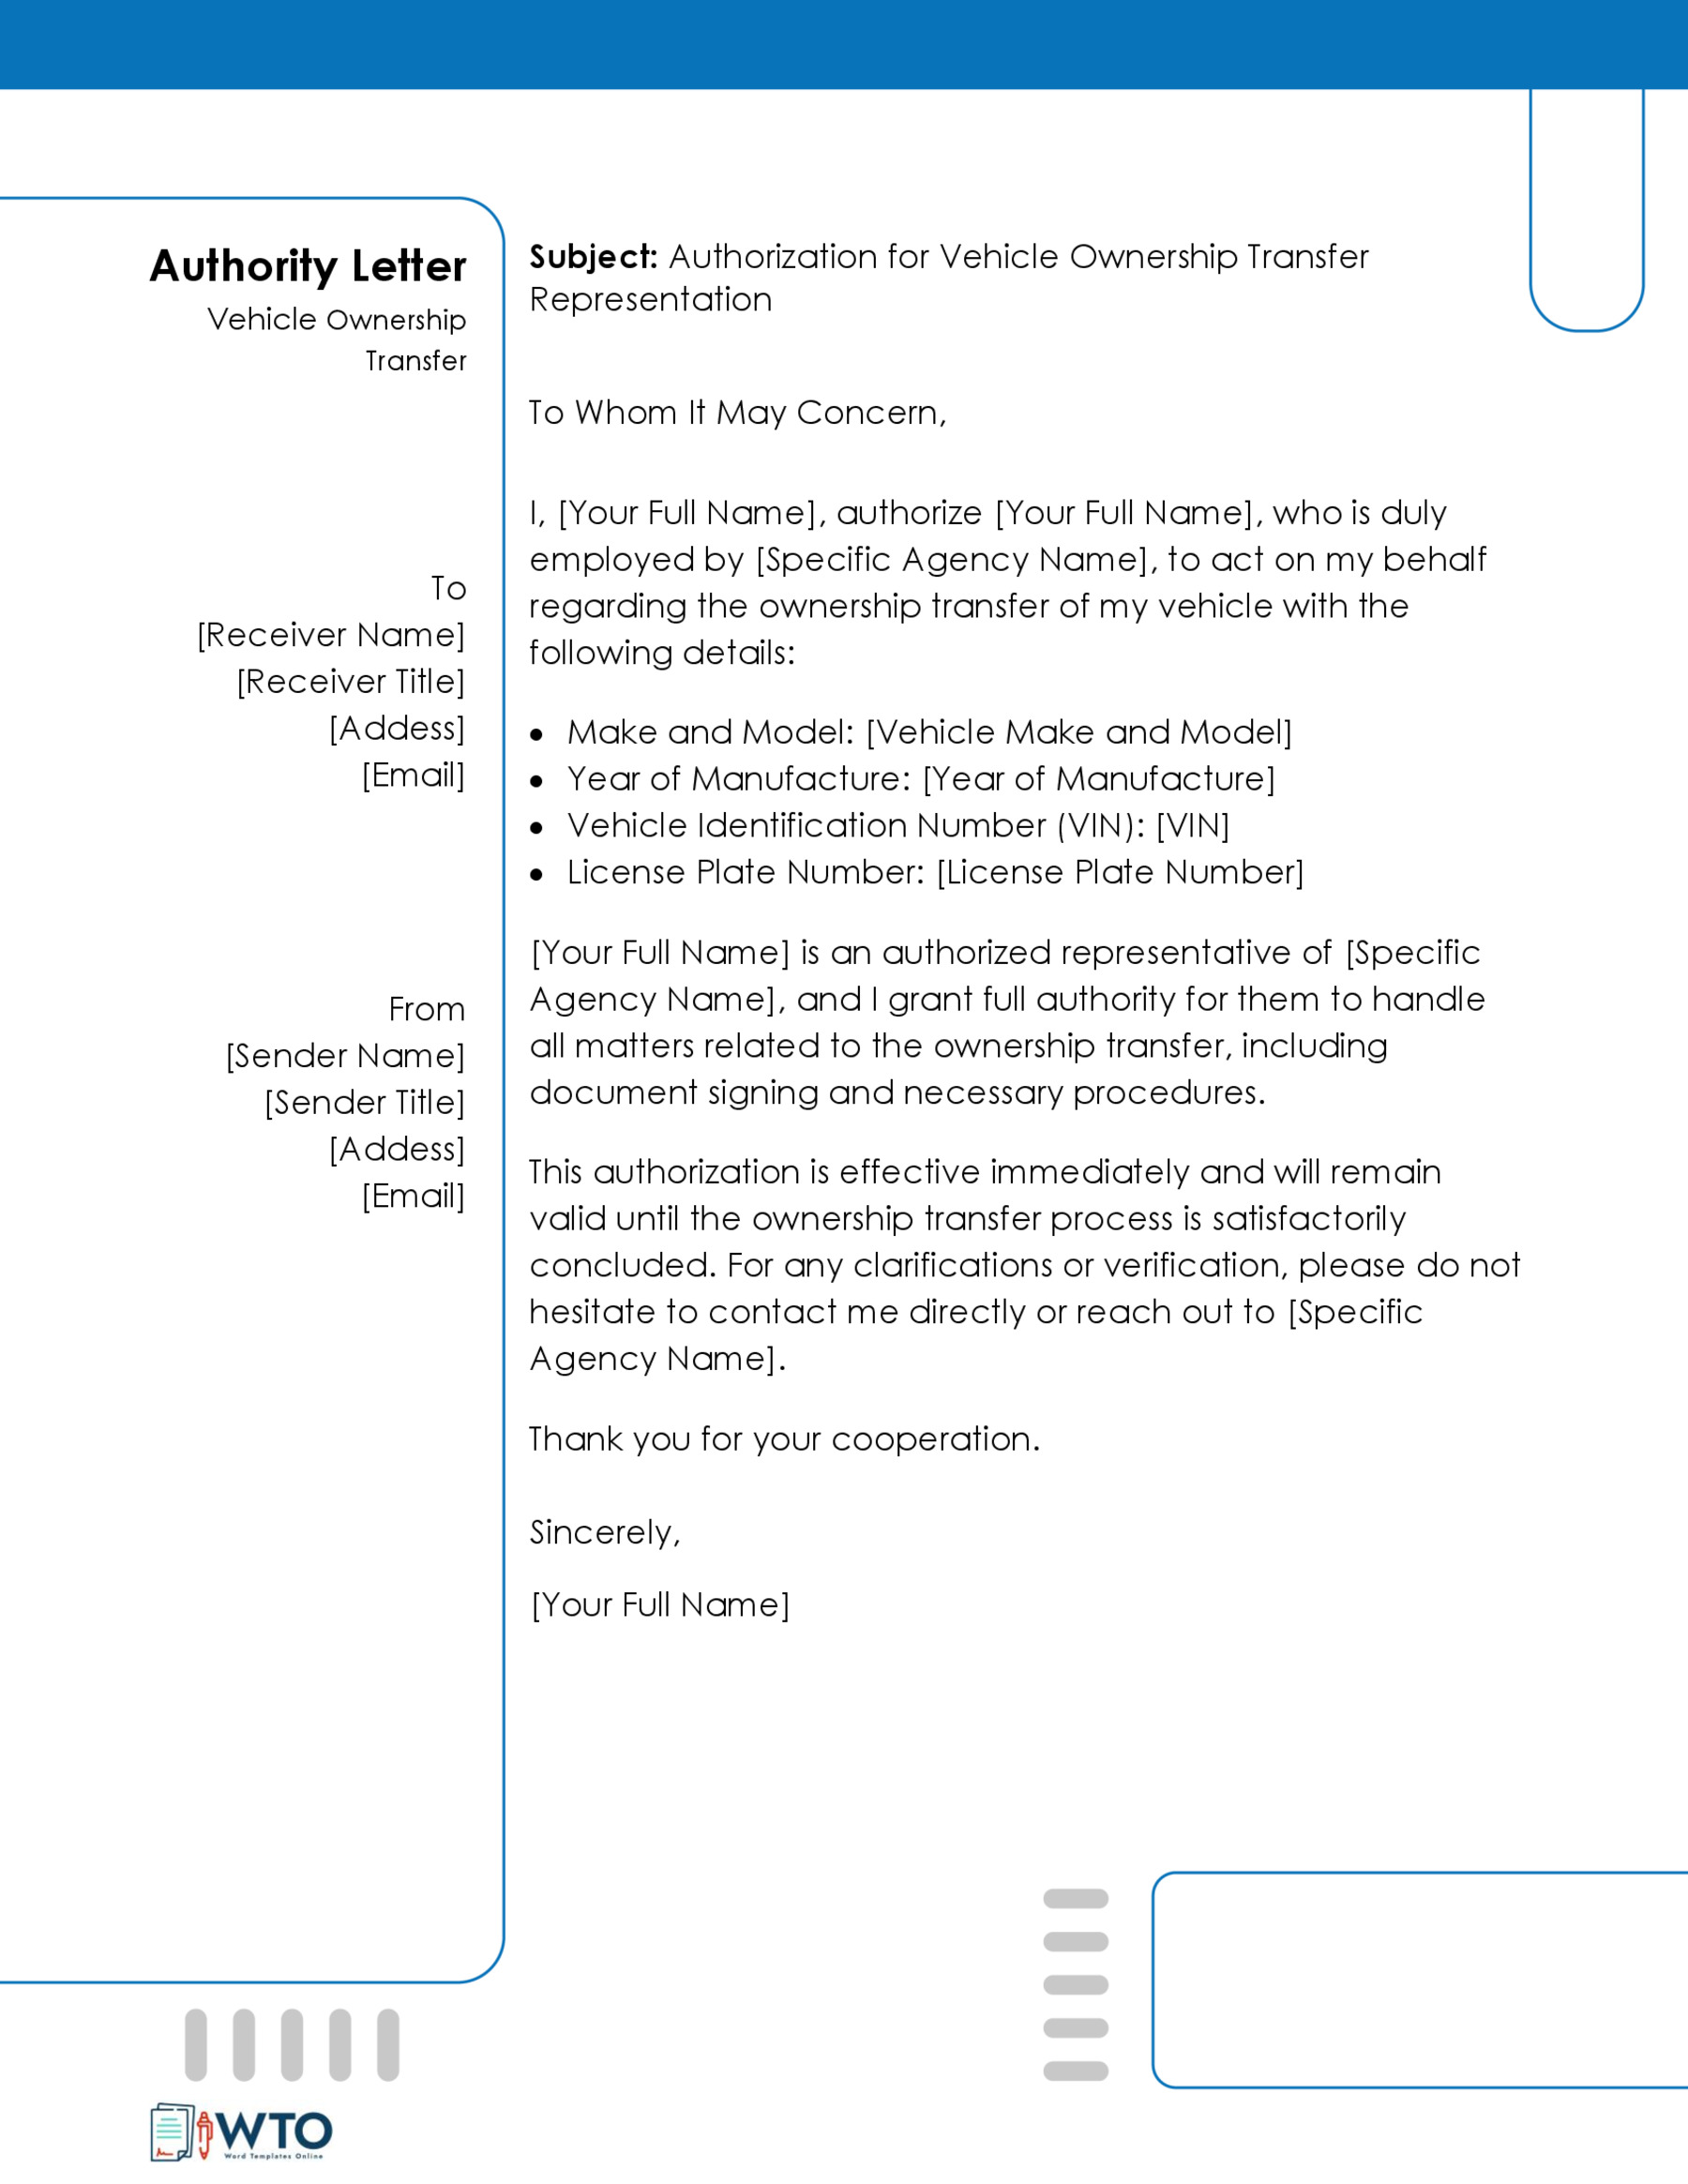 Authorization Letter Transfer Vehicle Ownership Letter Template-Downloadable Word Format